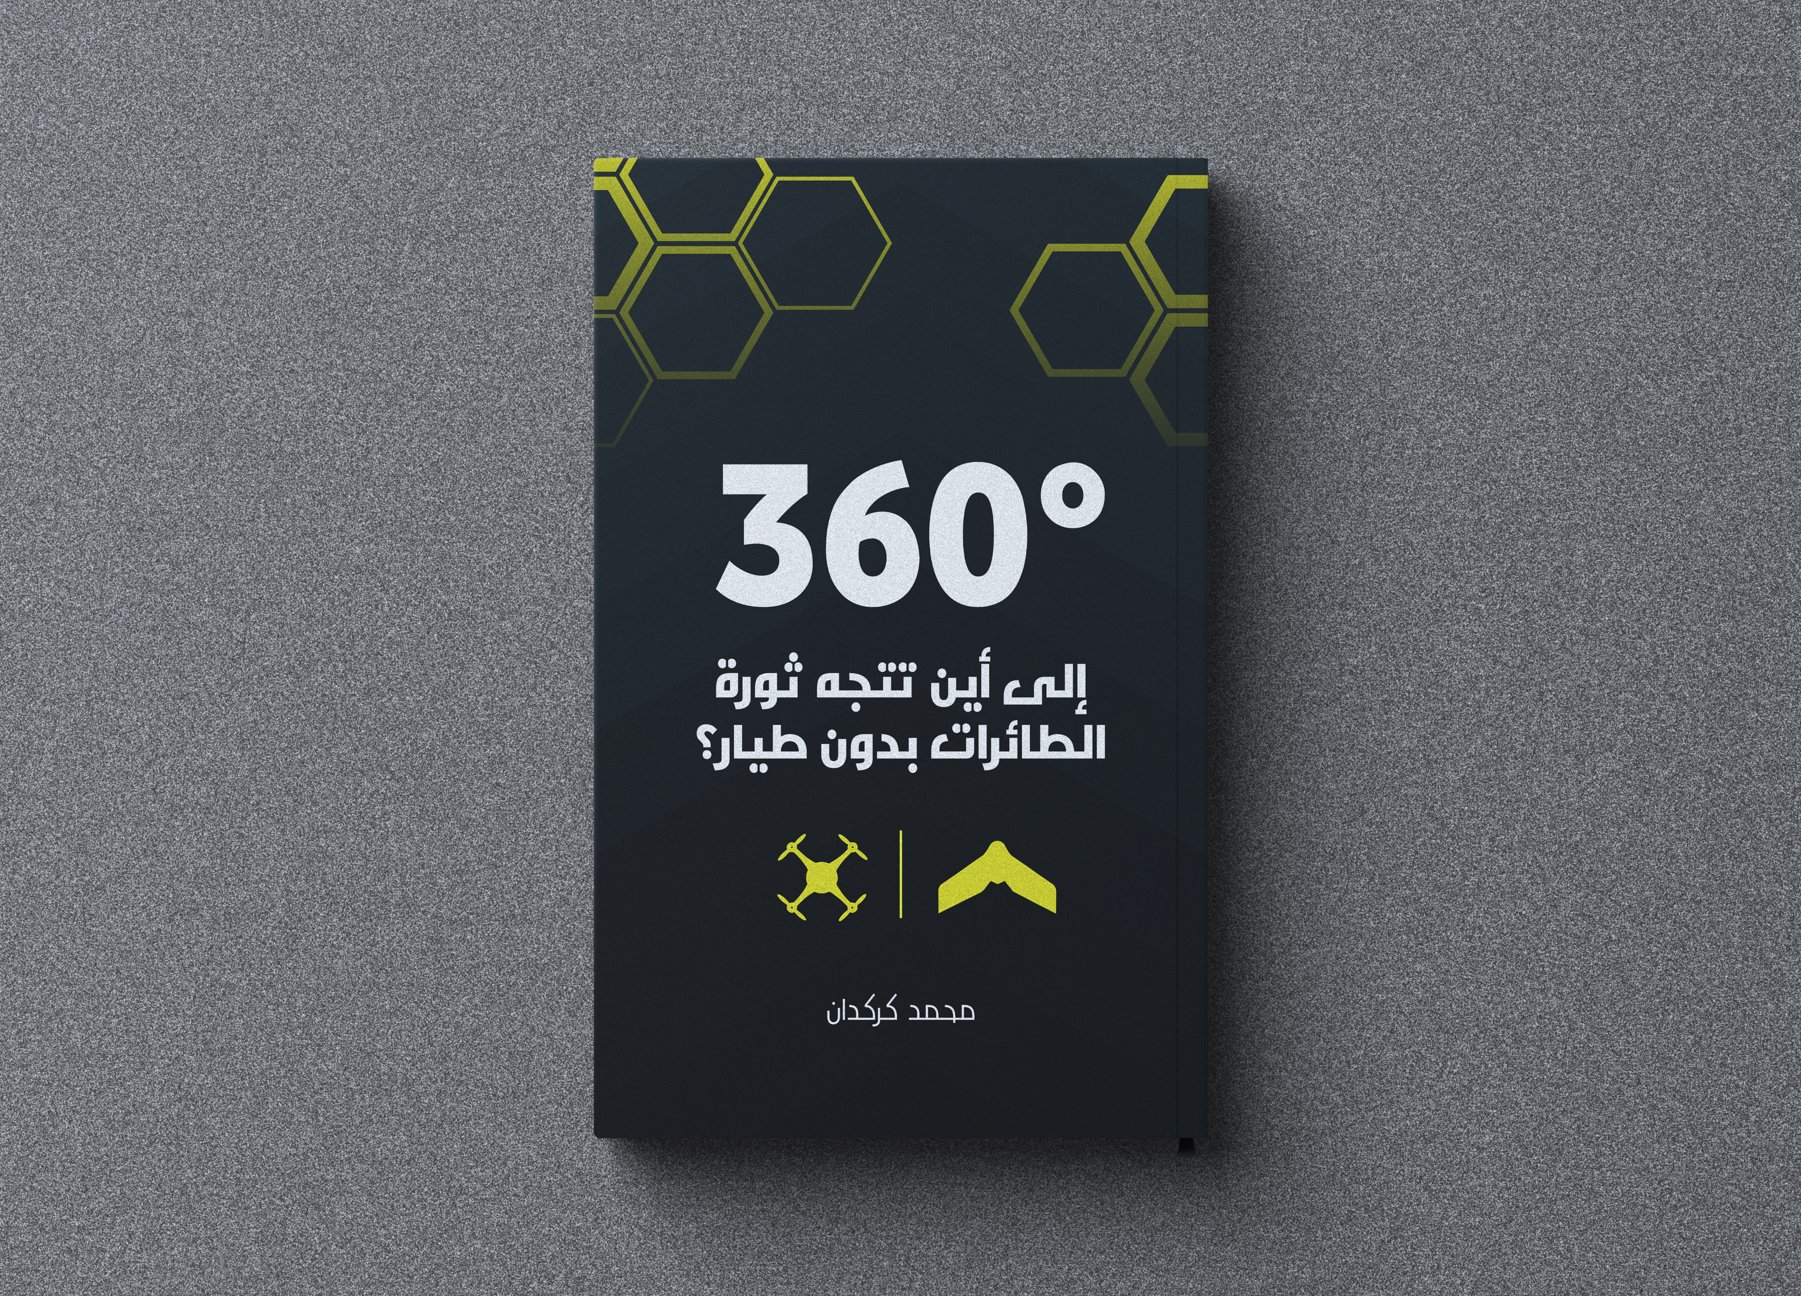 Soon a book in Arabic / where the UAV revolution is heading